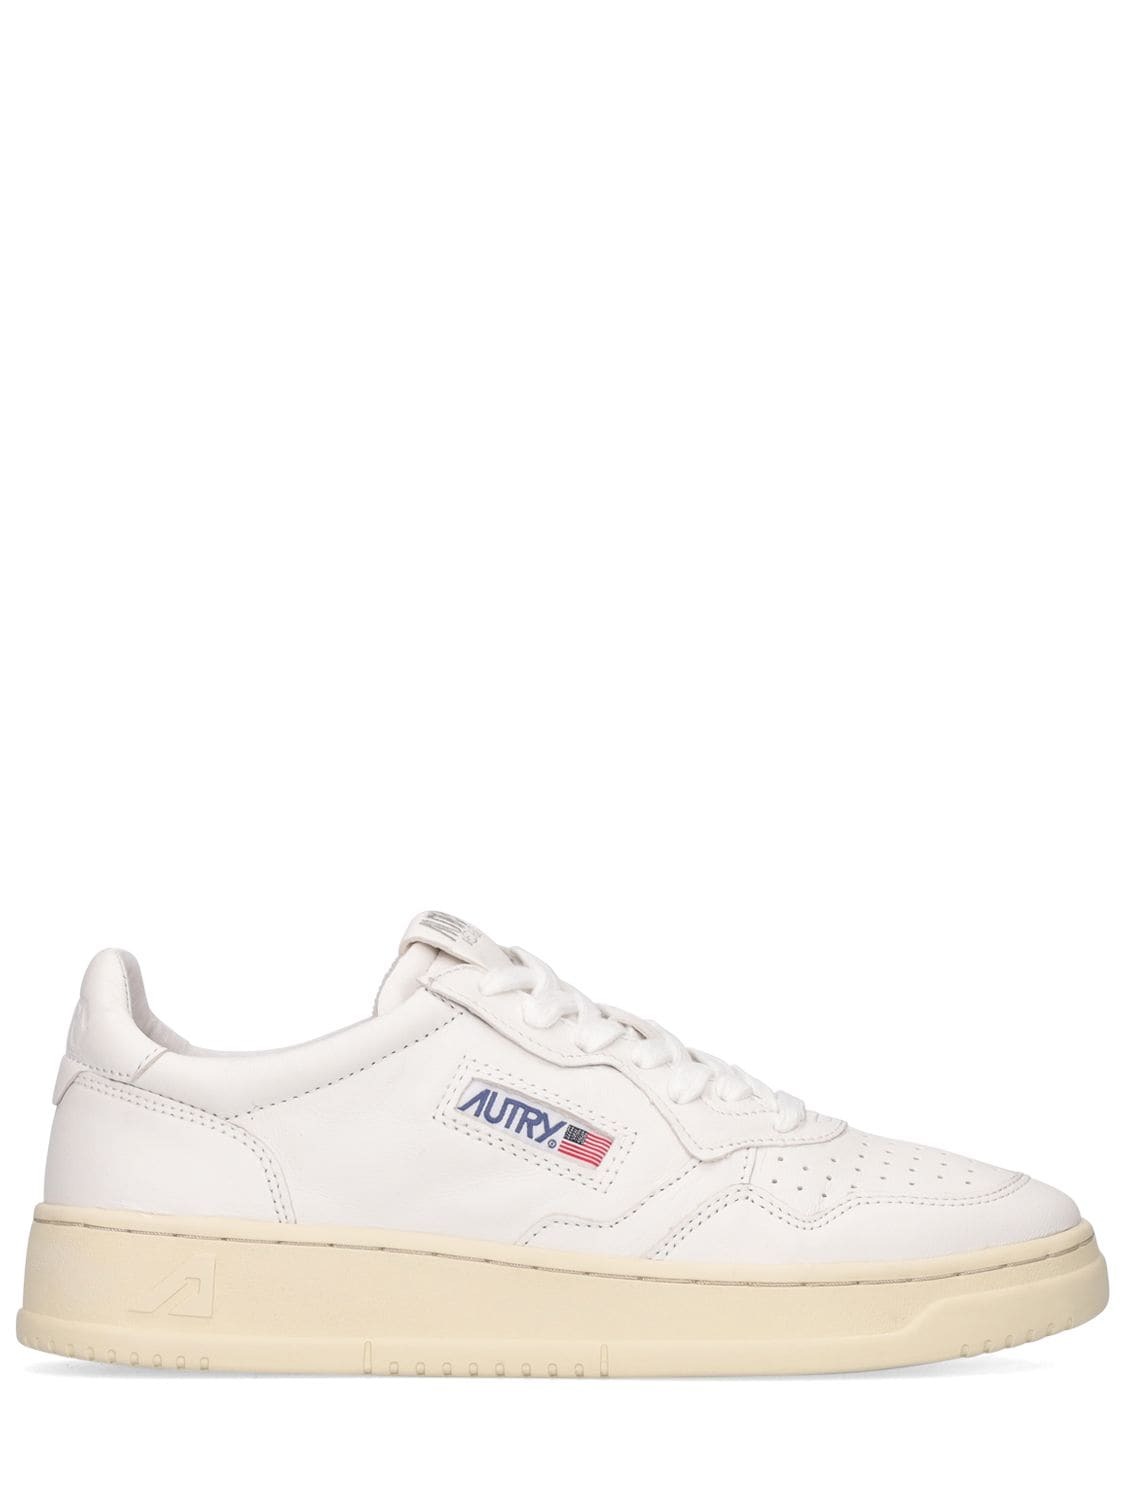 AUTRY Medalist Plain Sneakers in white